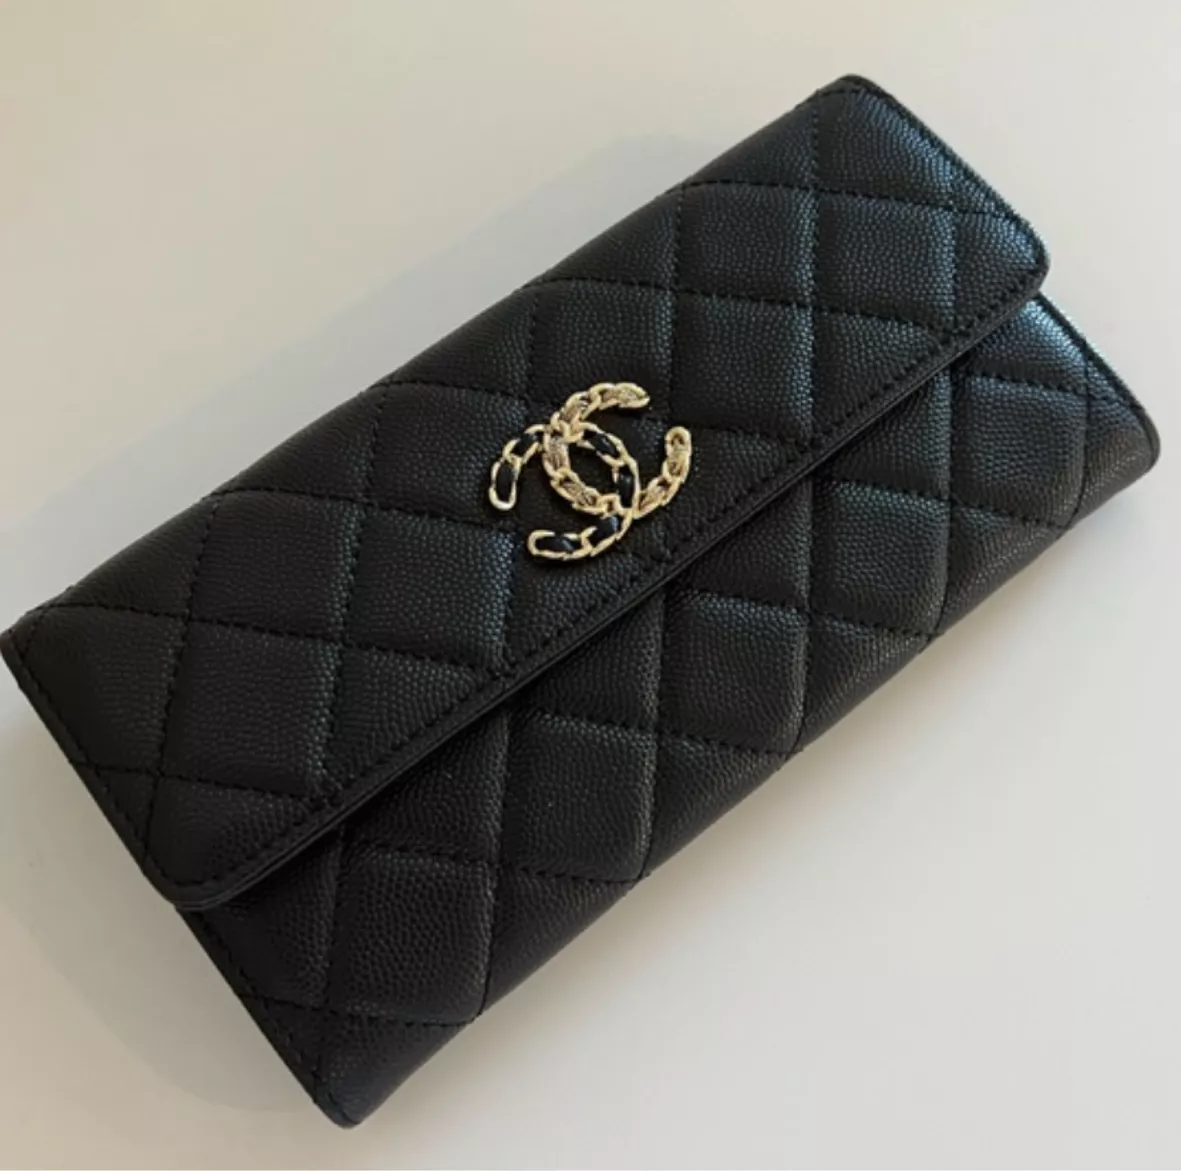 dhgate's Chanel Collection on LTK